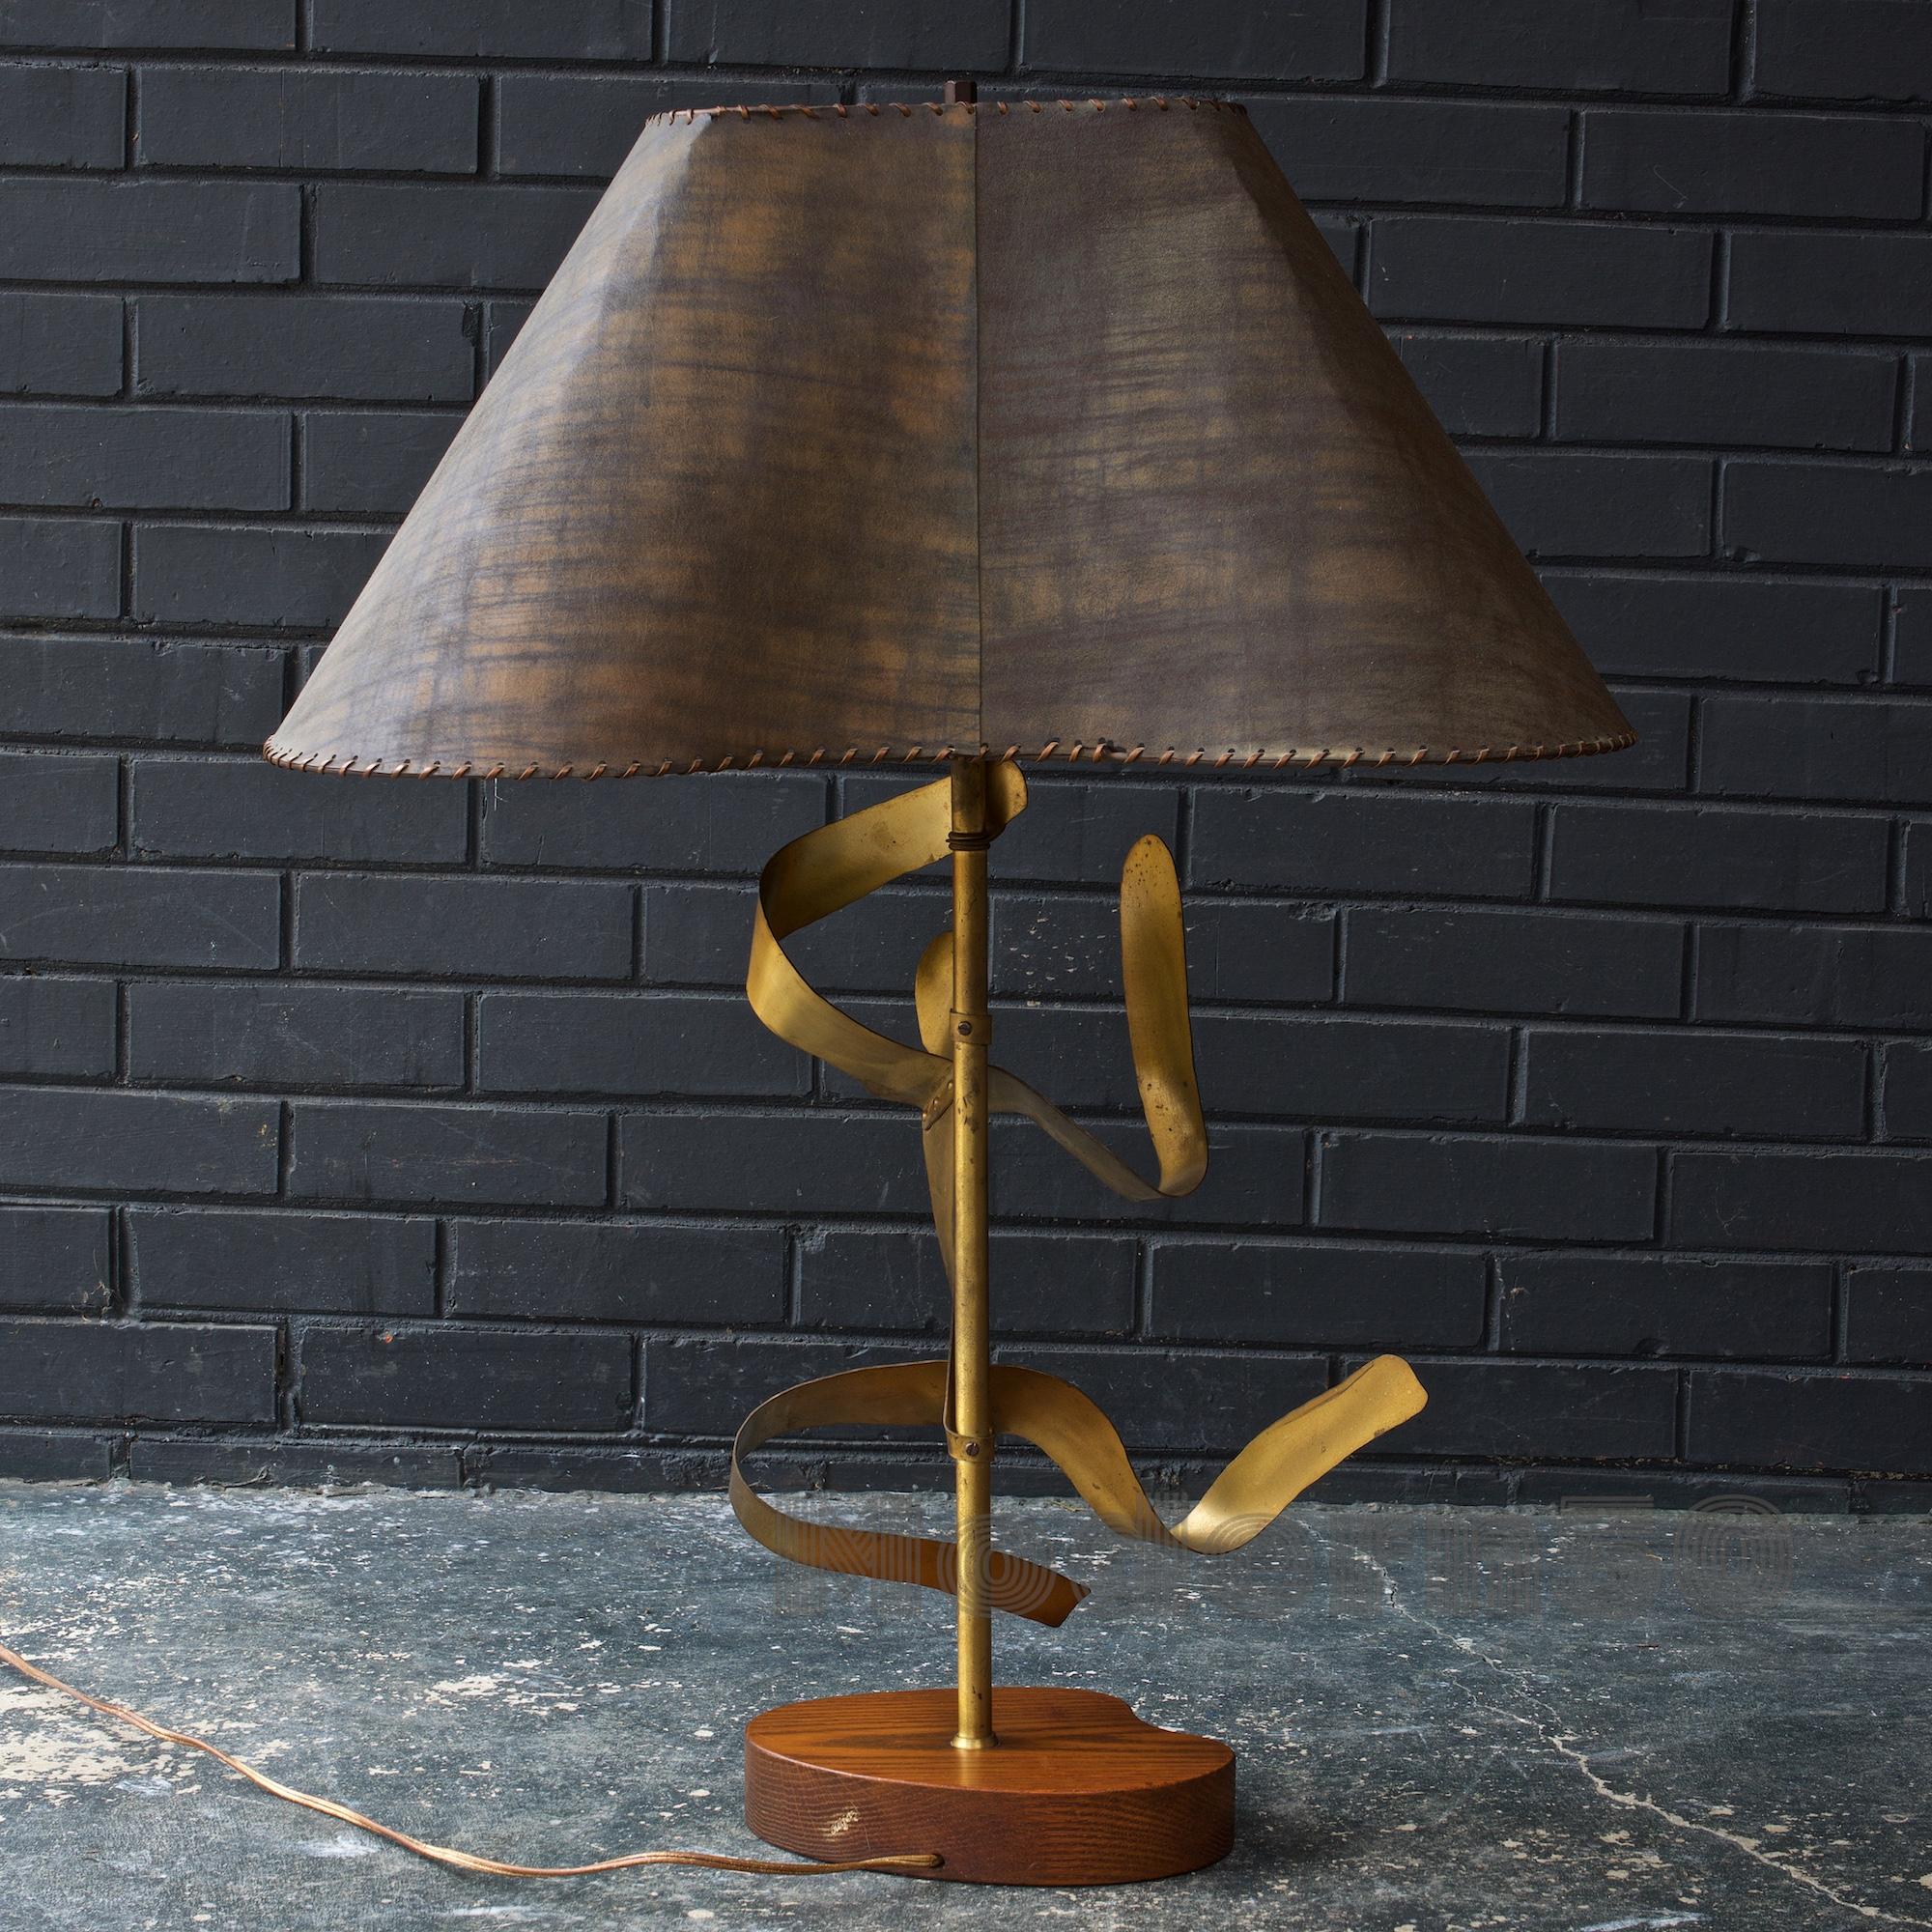 Lamp with the original shade and finial.
Measures: Lampshade is 24 x 15.5 x 11 in.
Lamp body 13 x 7 x 32 in.